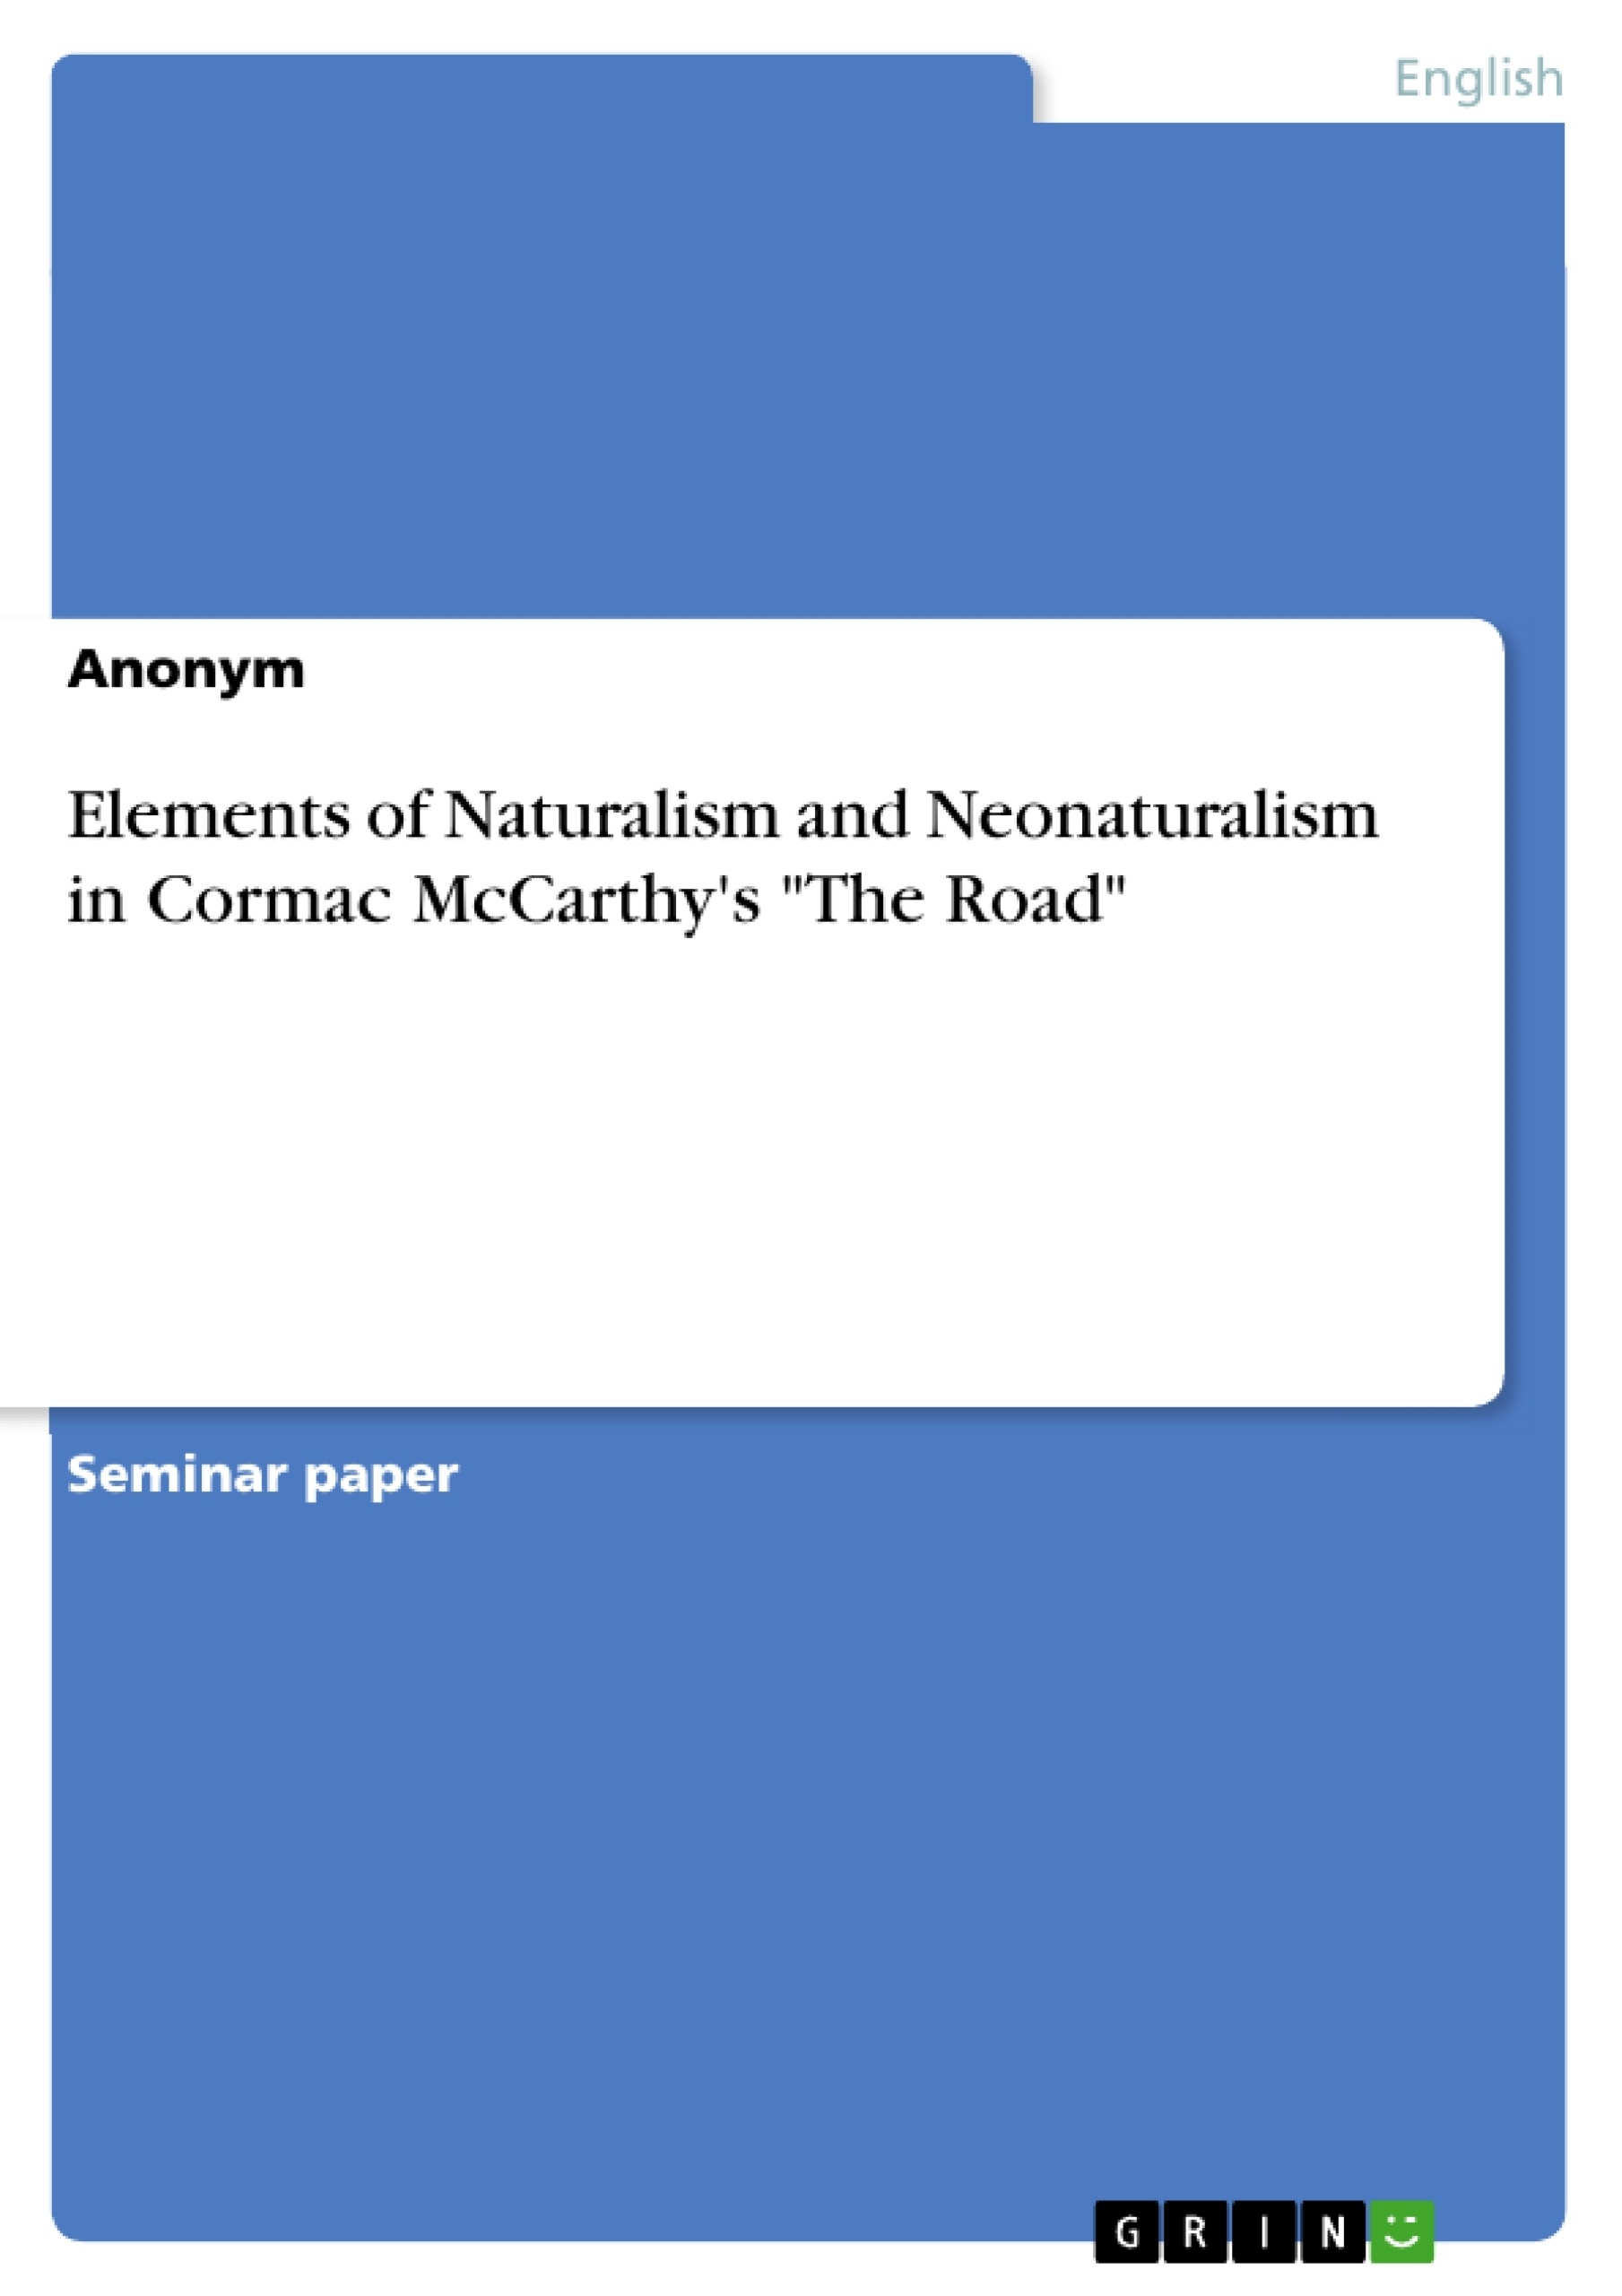 Título: Elements of Naturalism and Neonaturalism in Cormac McCarthy's "The Road"